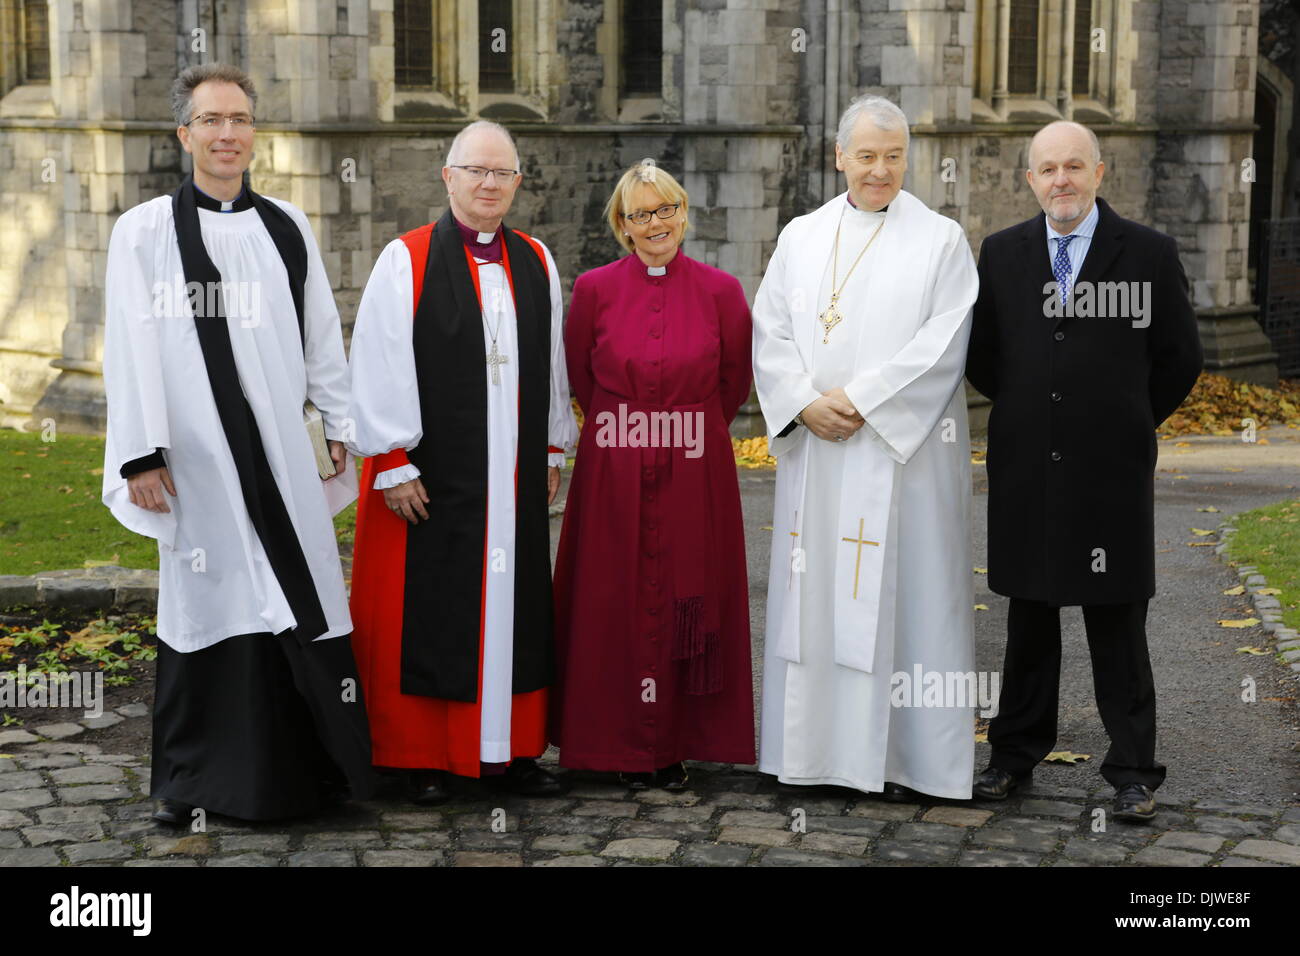 Dublin, Ireland. 30th November 2013. The bishop-elect the Revd Pat Storey (M) is pictured with the Revd Nigel Parker (L), the Archbishop of Armagh, the Most Revd Richard Clarke (2 L), the Archbishop of Dublin, the Most Revd Dr Michael Jackson (2 R) and her husband the Revd Earl Storey (R) before the service. The Most Revd Pat Storey has been consecrated as Church of Ireland Bishop of Meath and Kildare in Dublin's Christ Church Cathedral. She is the first female Bishop to be consecrated in any denomination in Ireland and the UK, 23 years after the Church of Ireland approved the ordination of wo Stock Photo